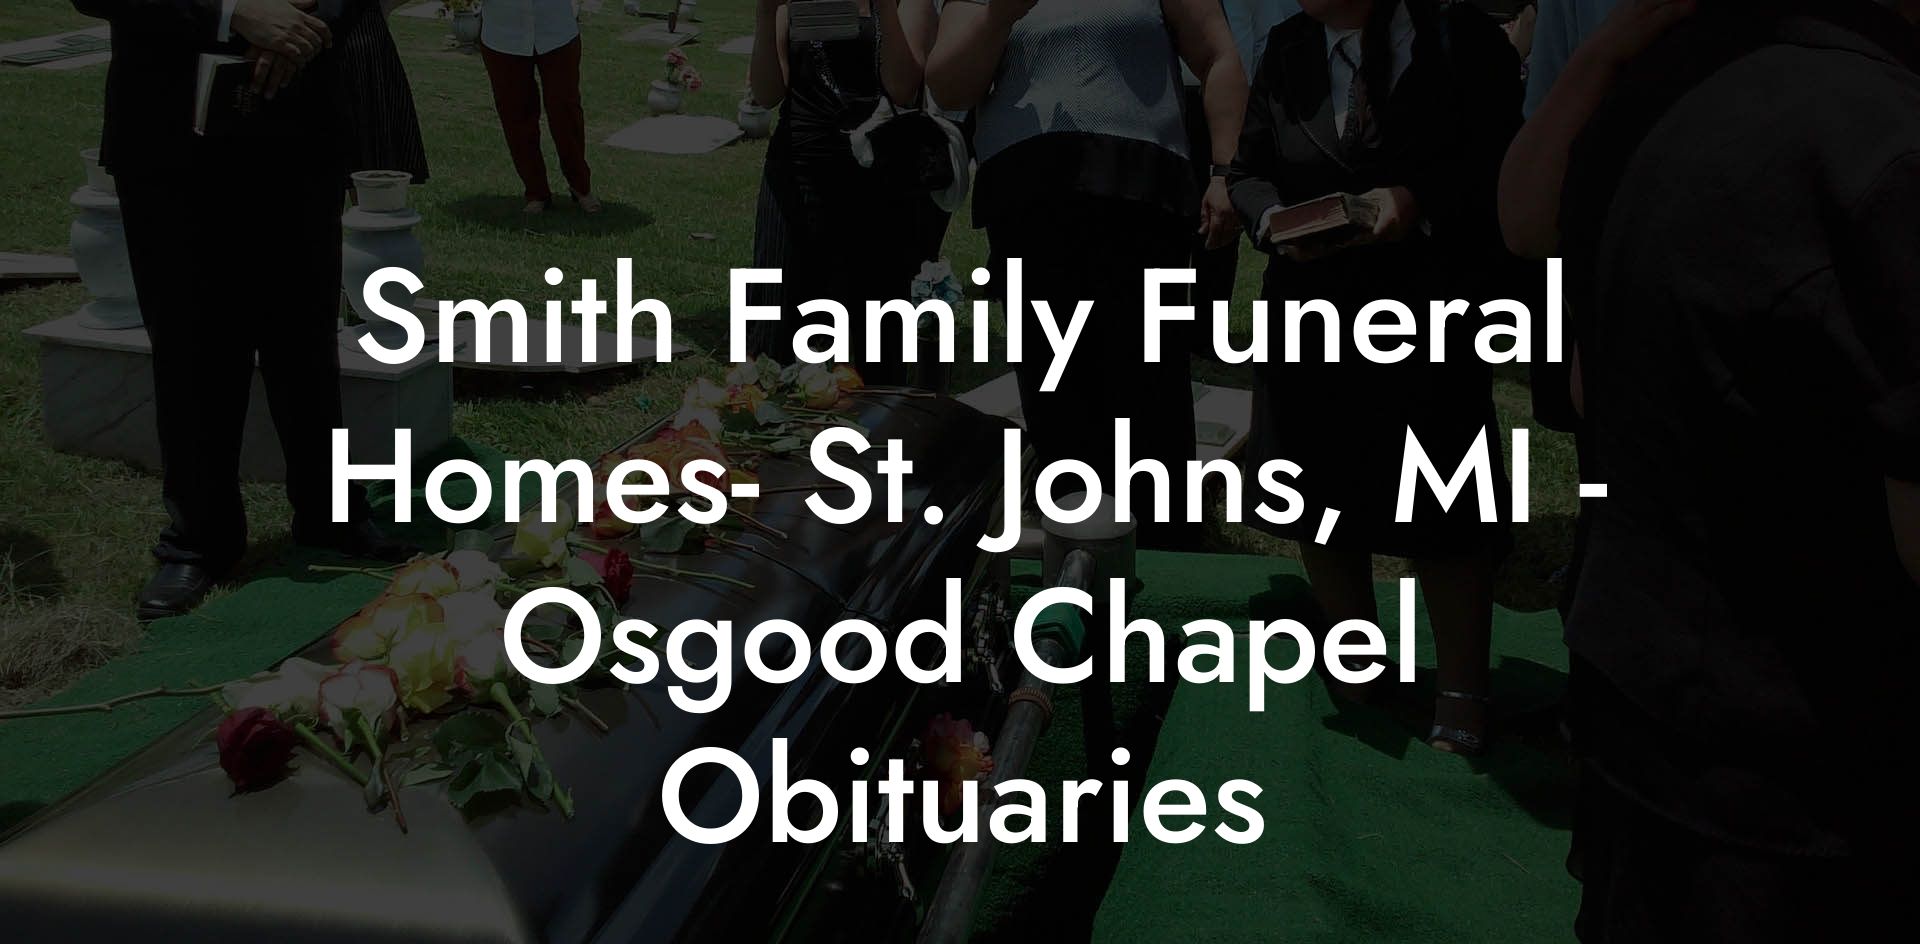 Smith Family Funeral Homes- St. Johns, MI - Osgood Chapel Obituaries